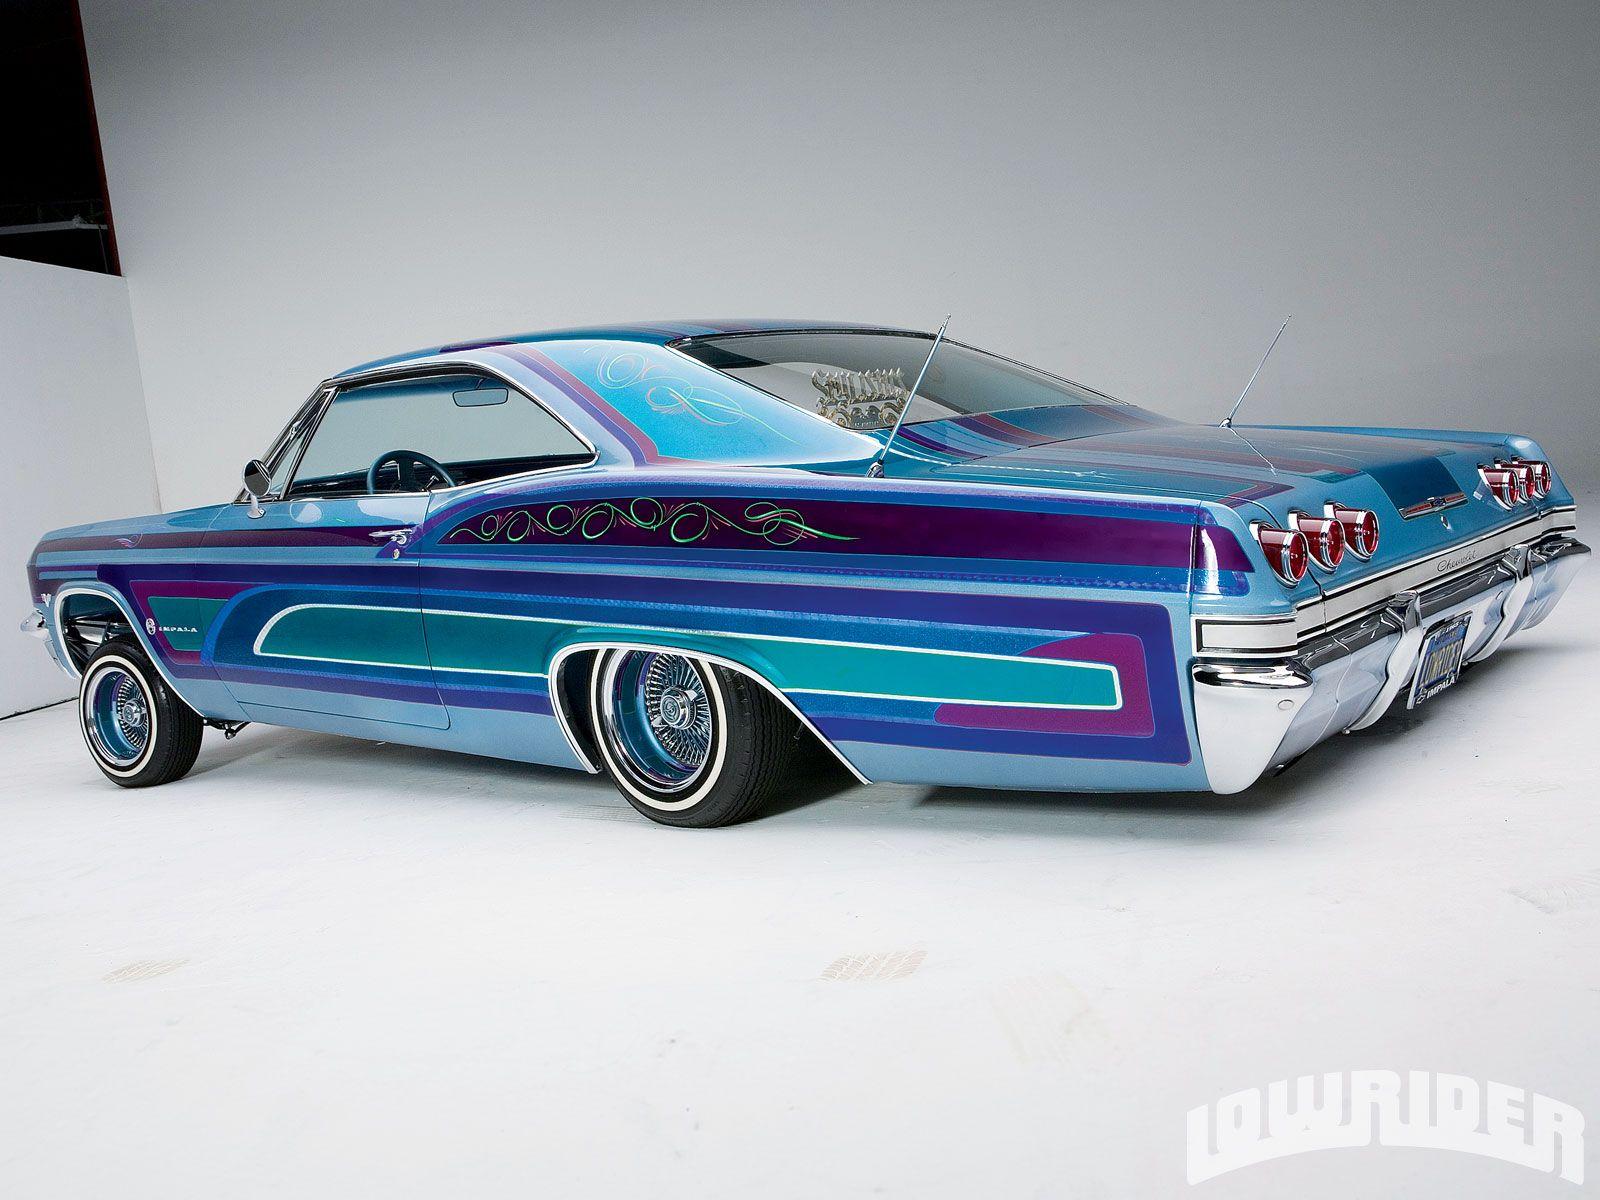 Chevy Impala Lowrider Wallpaper. Trendy Chevy Impala Lowrider With